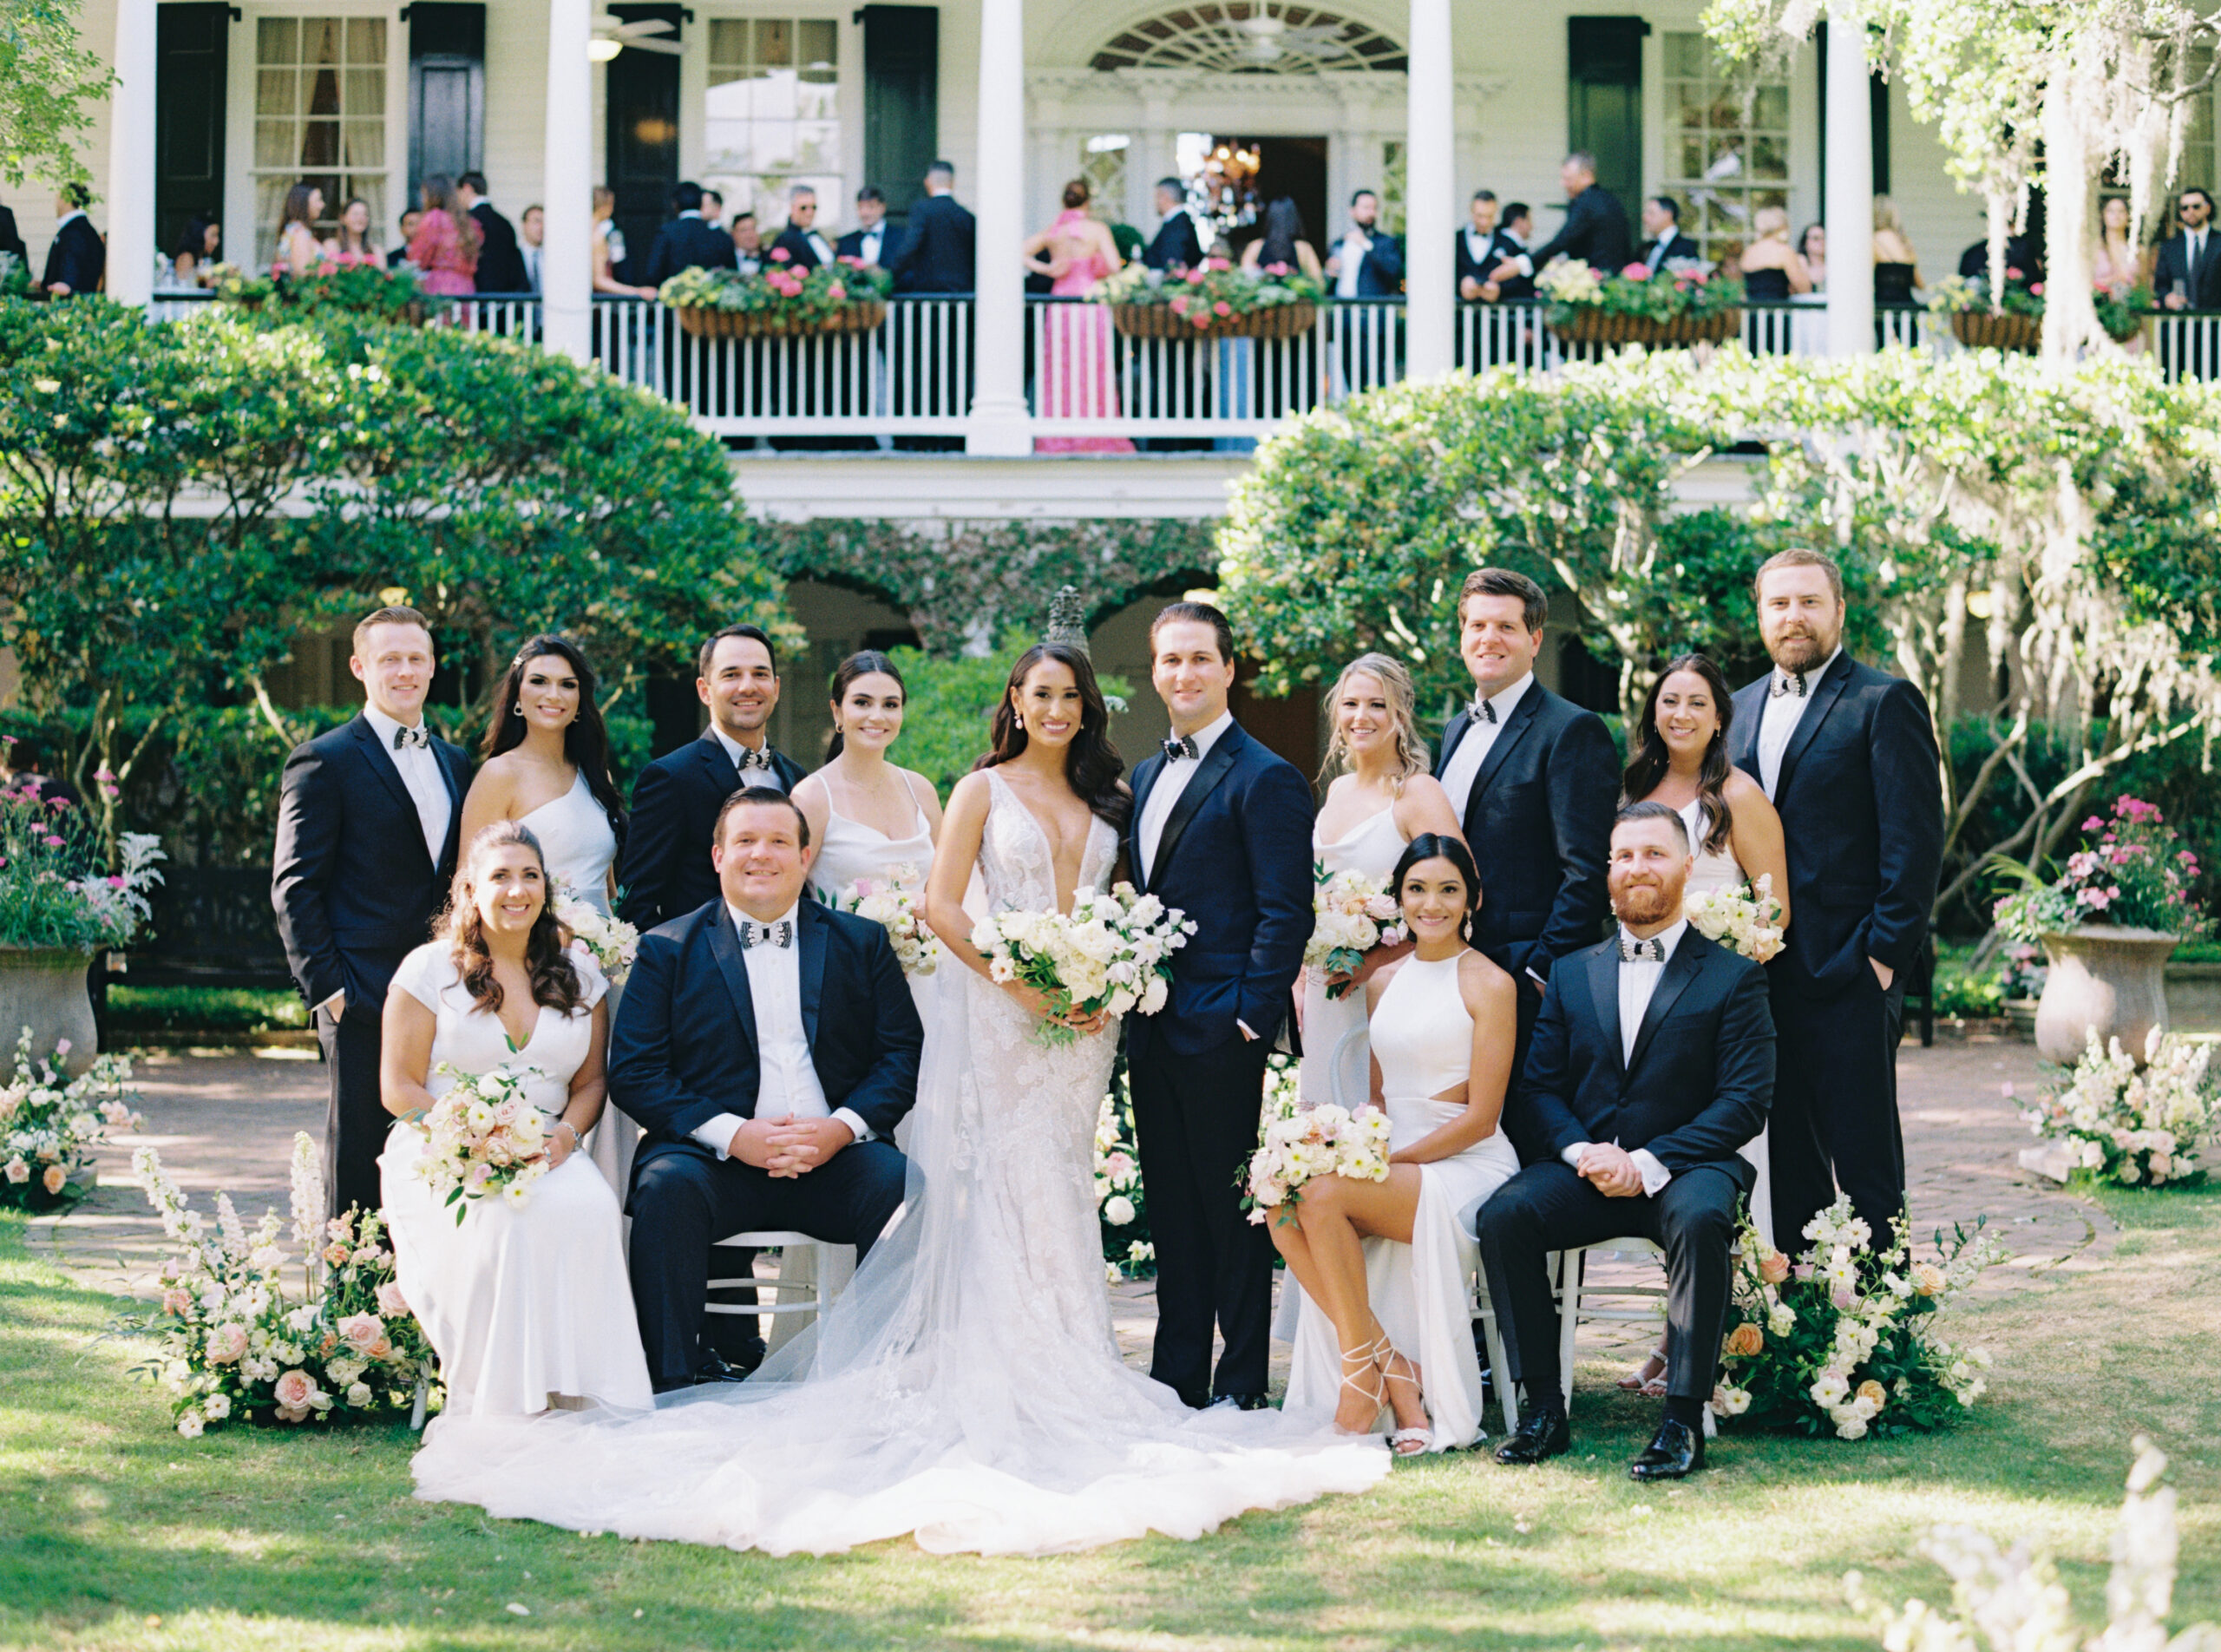 Bridal party portrait in front of cocktail hour on the porch at Thomas Bennett House.